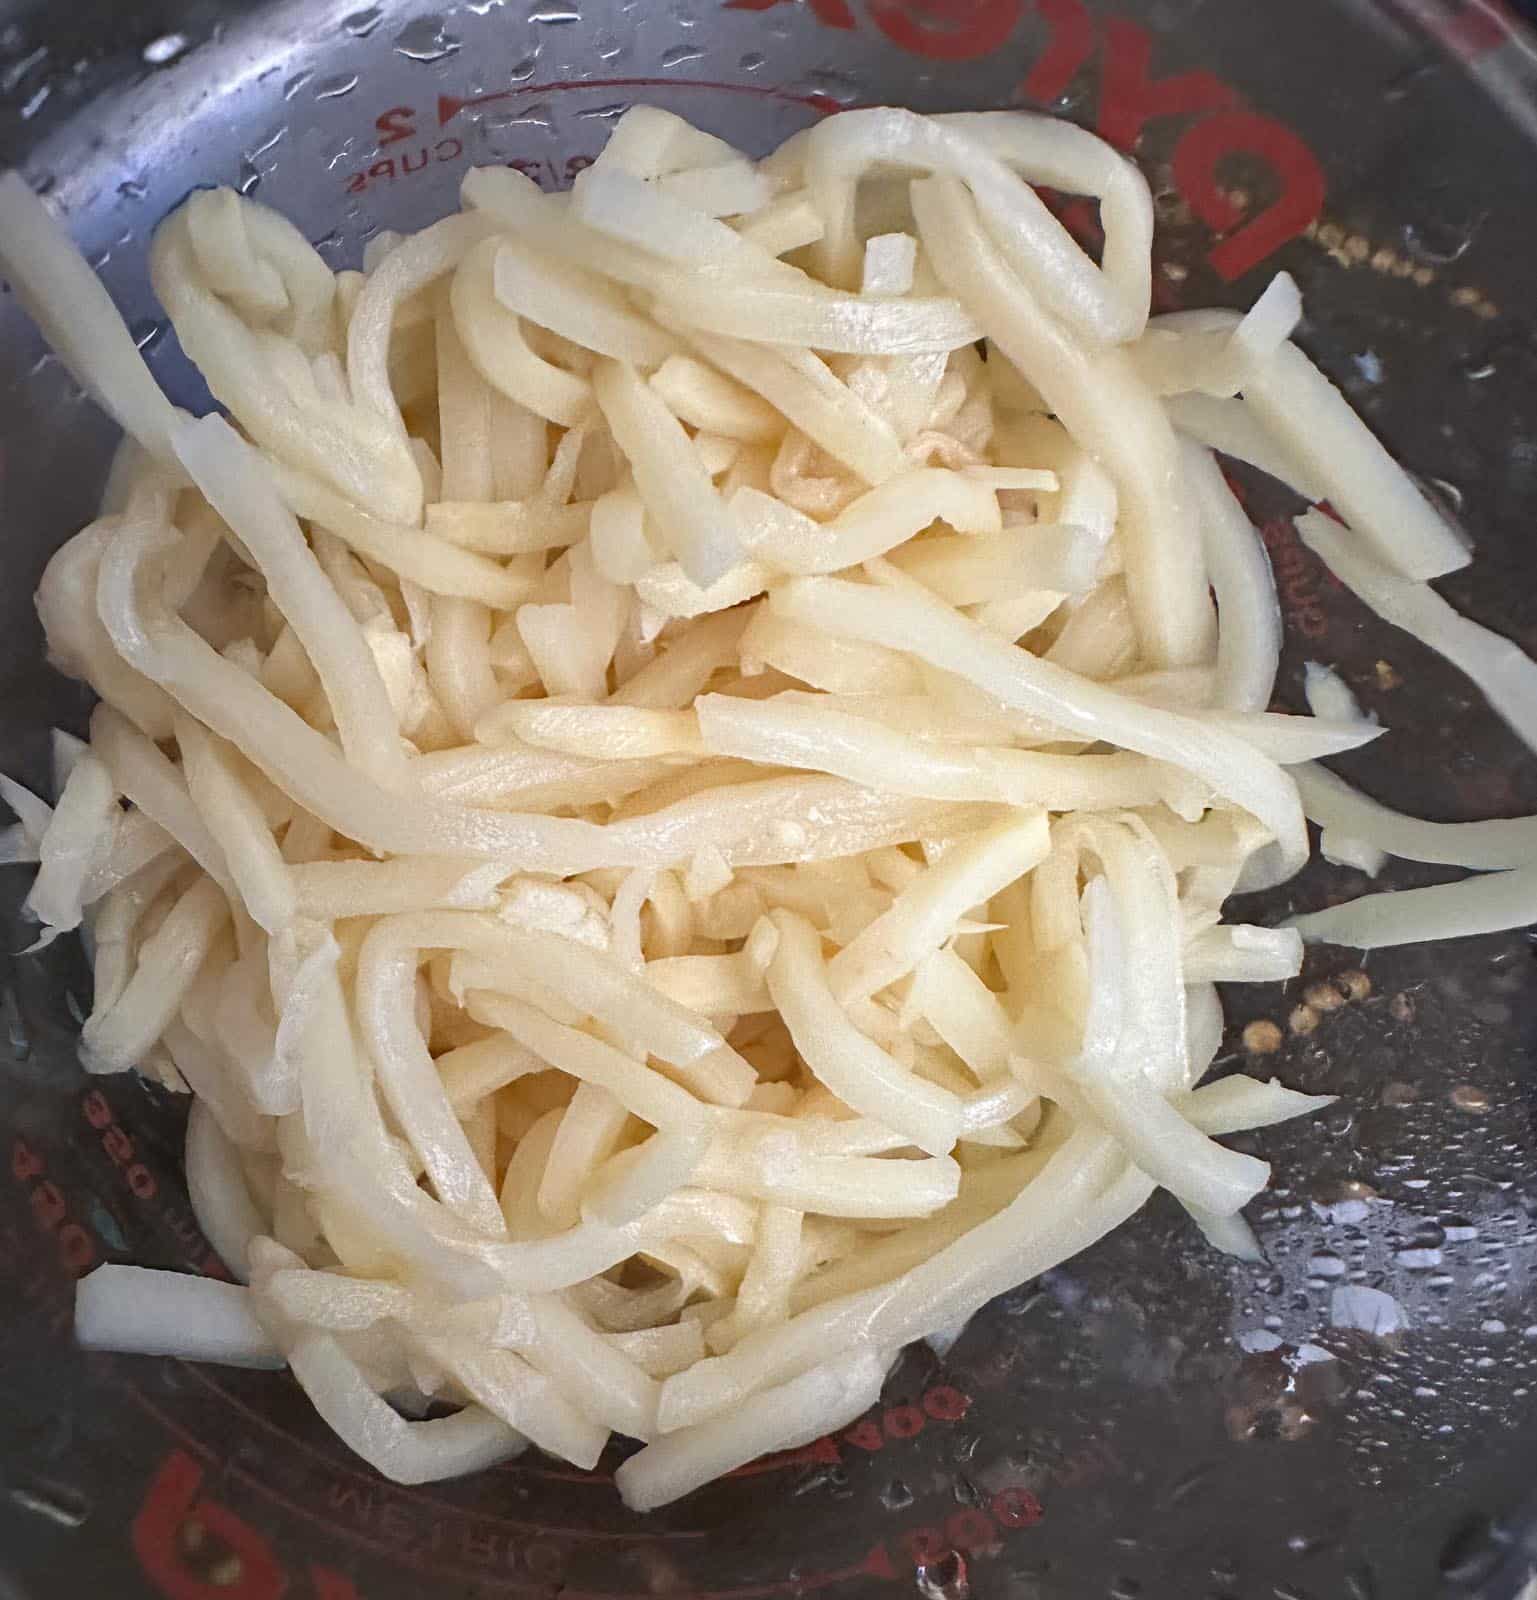 drained bamboo shoots in glass dish.